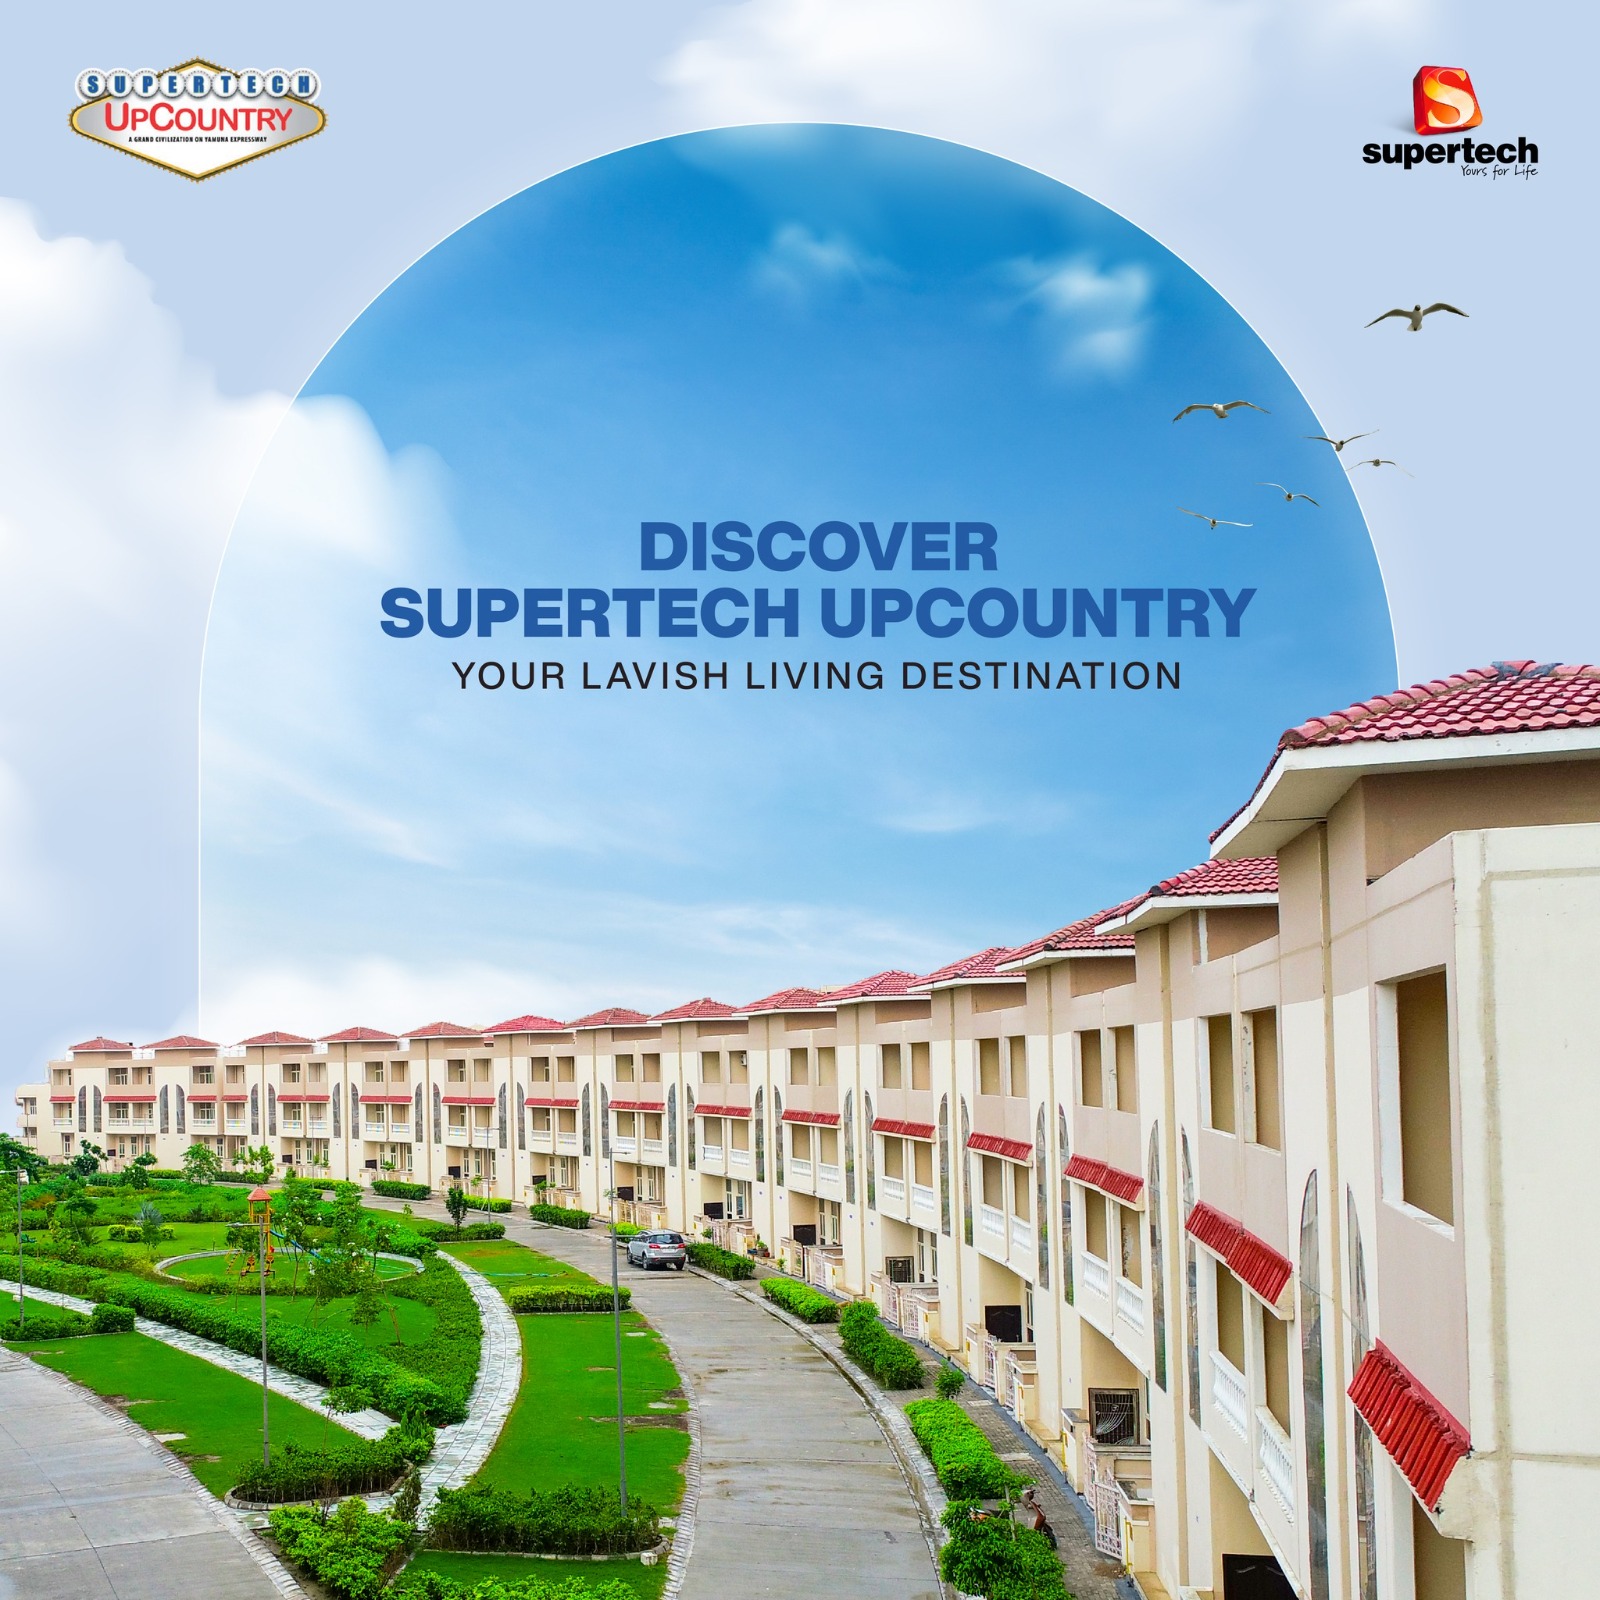 Supertech Upcountry: Experience the Pinnacle of Suburban Bliss Update